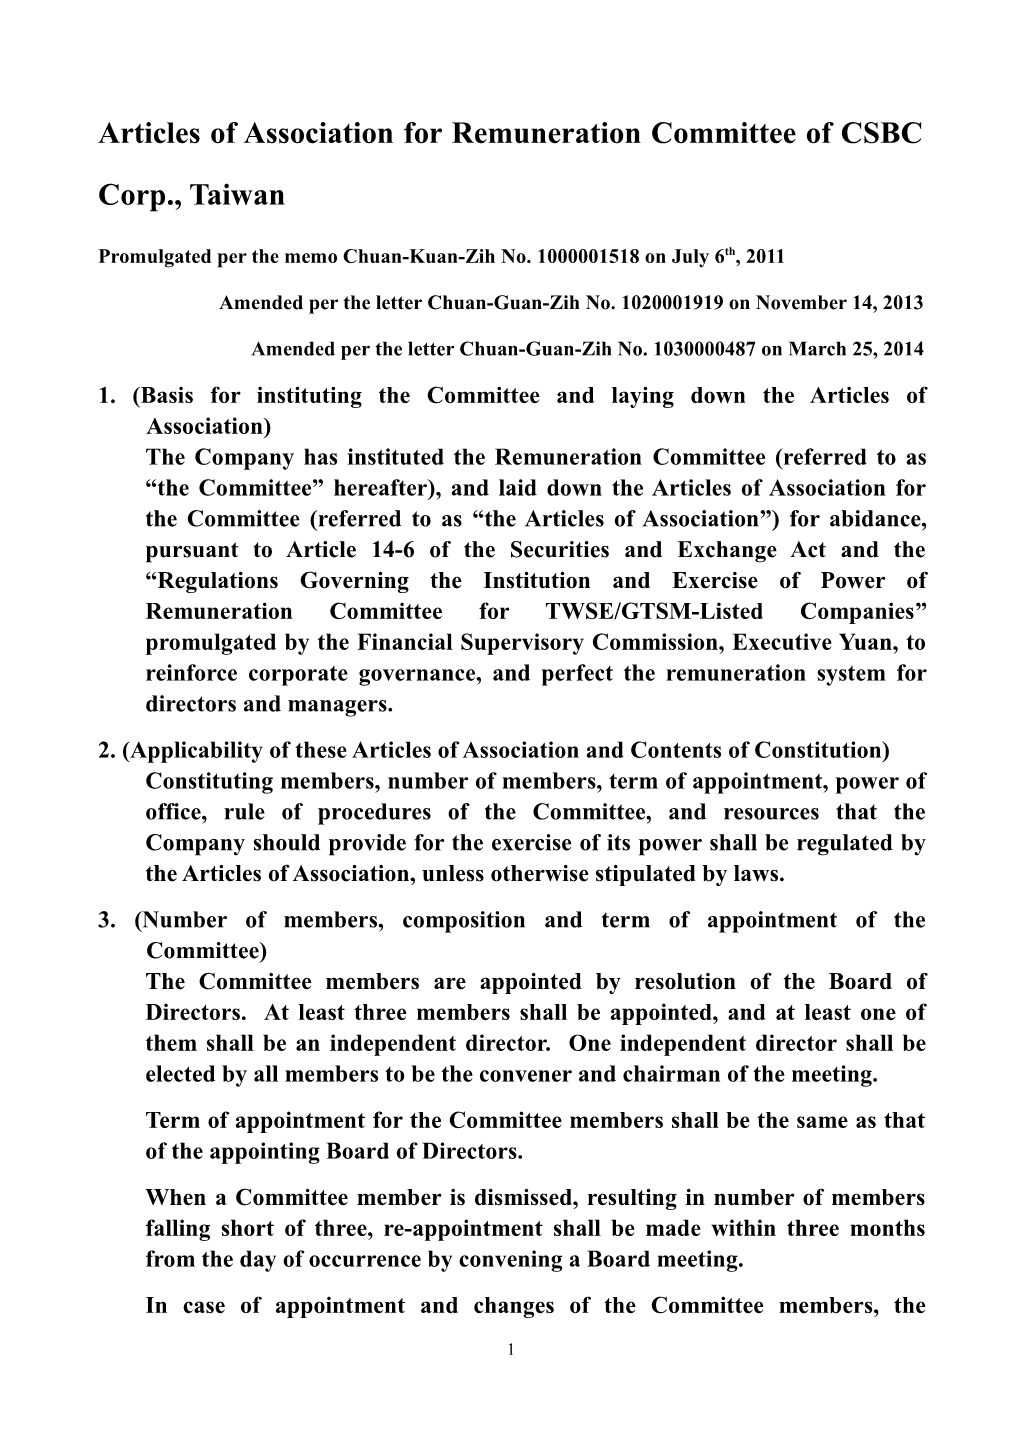 Articles of Association for Remuneration Committee of CSBC Corp., Taiwan